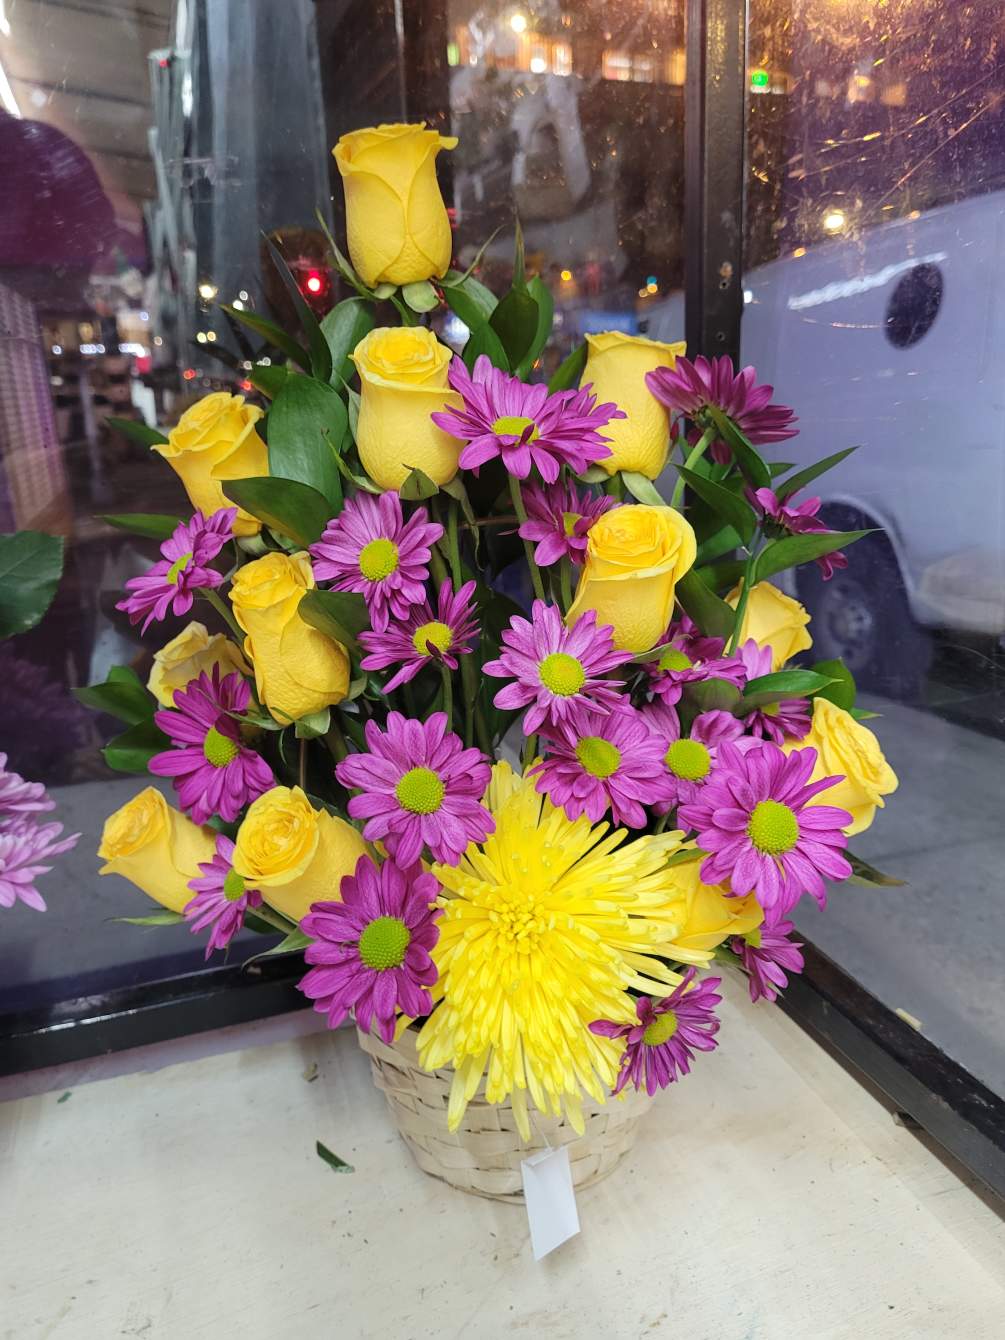 it is made with:
12 yellow roses
purple daisies
yellow spiders
greens
basket